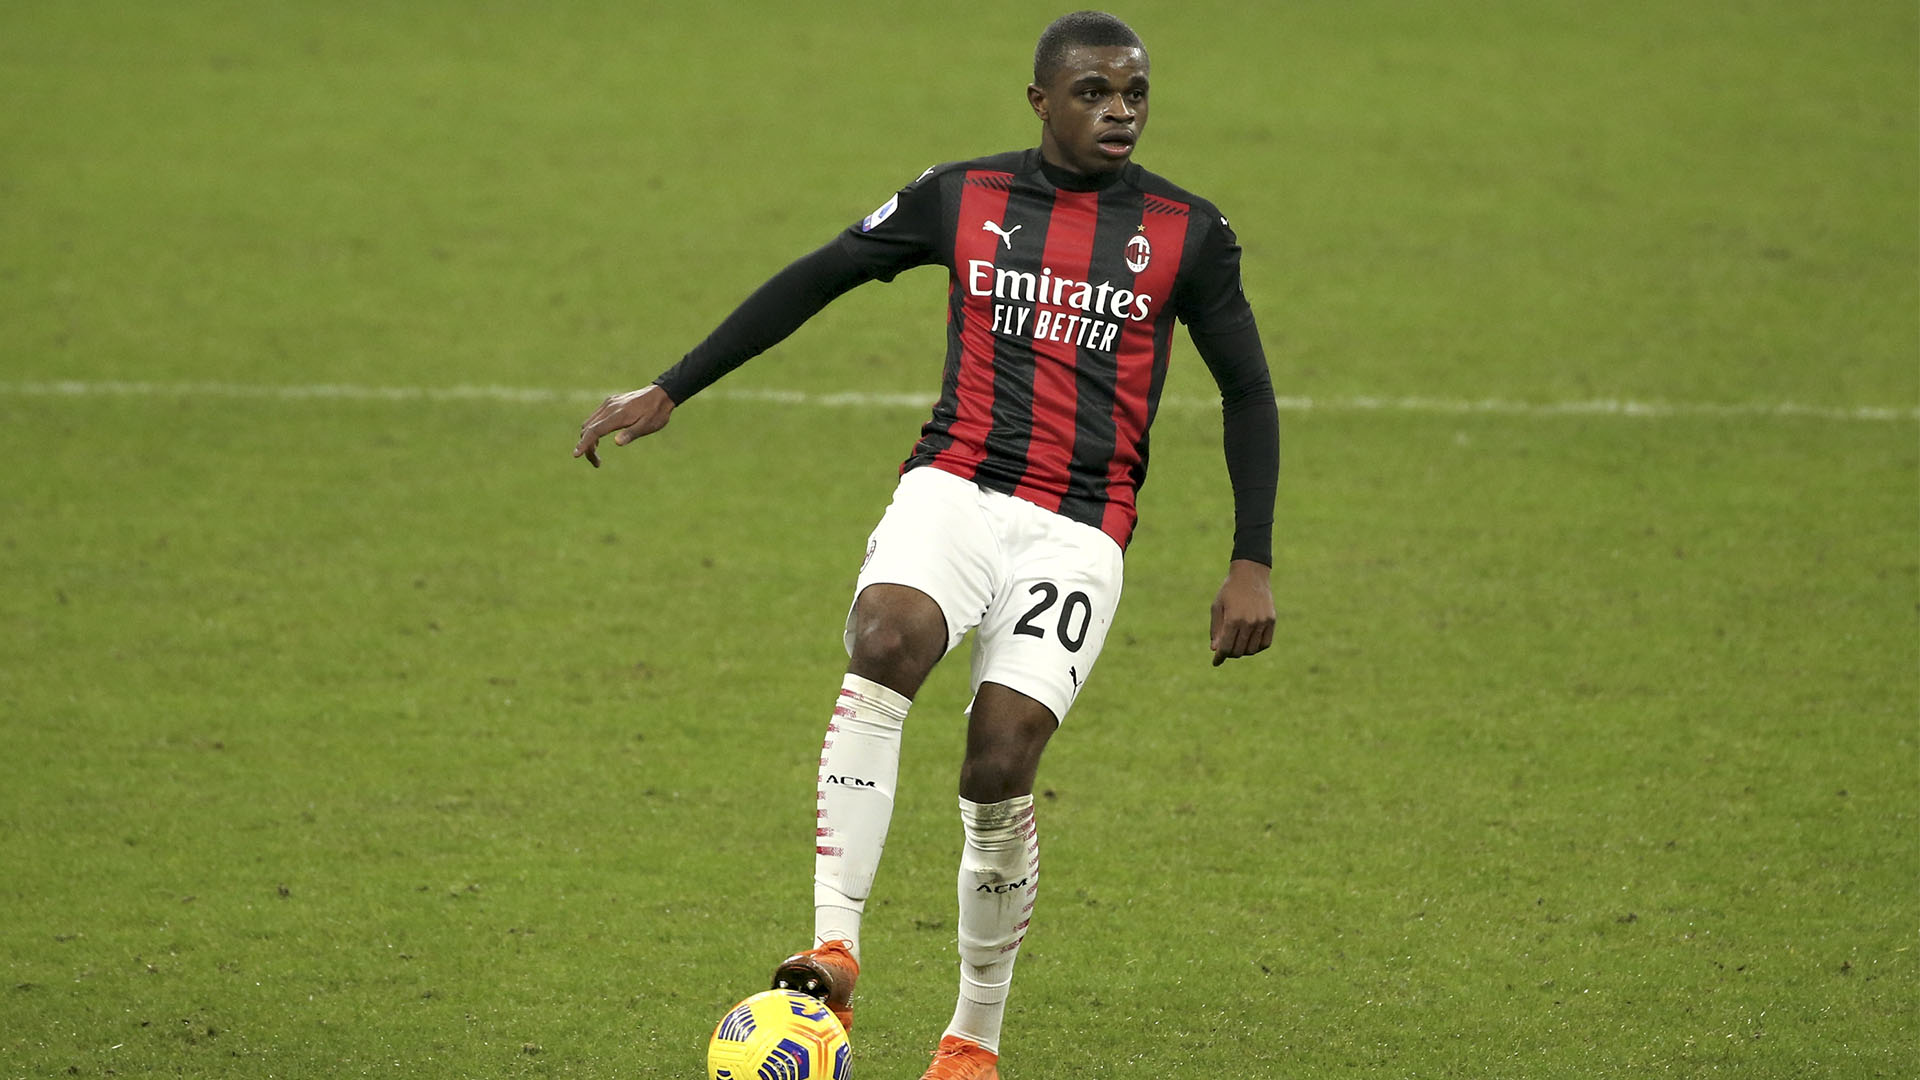 Pierre Kalulu is back on the shelf with another significant injury, and Milan are growing concerned. He previously missed four months due to a tendon tear.